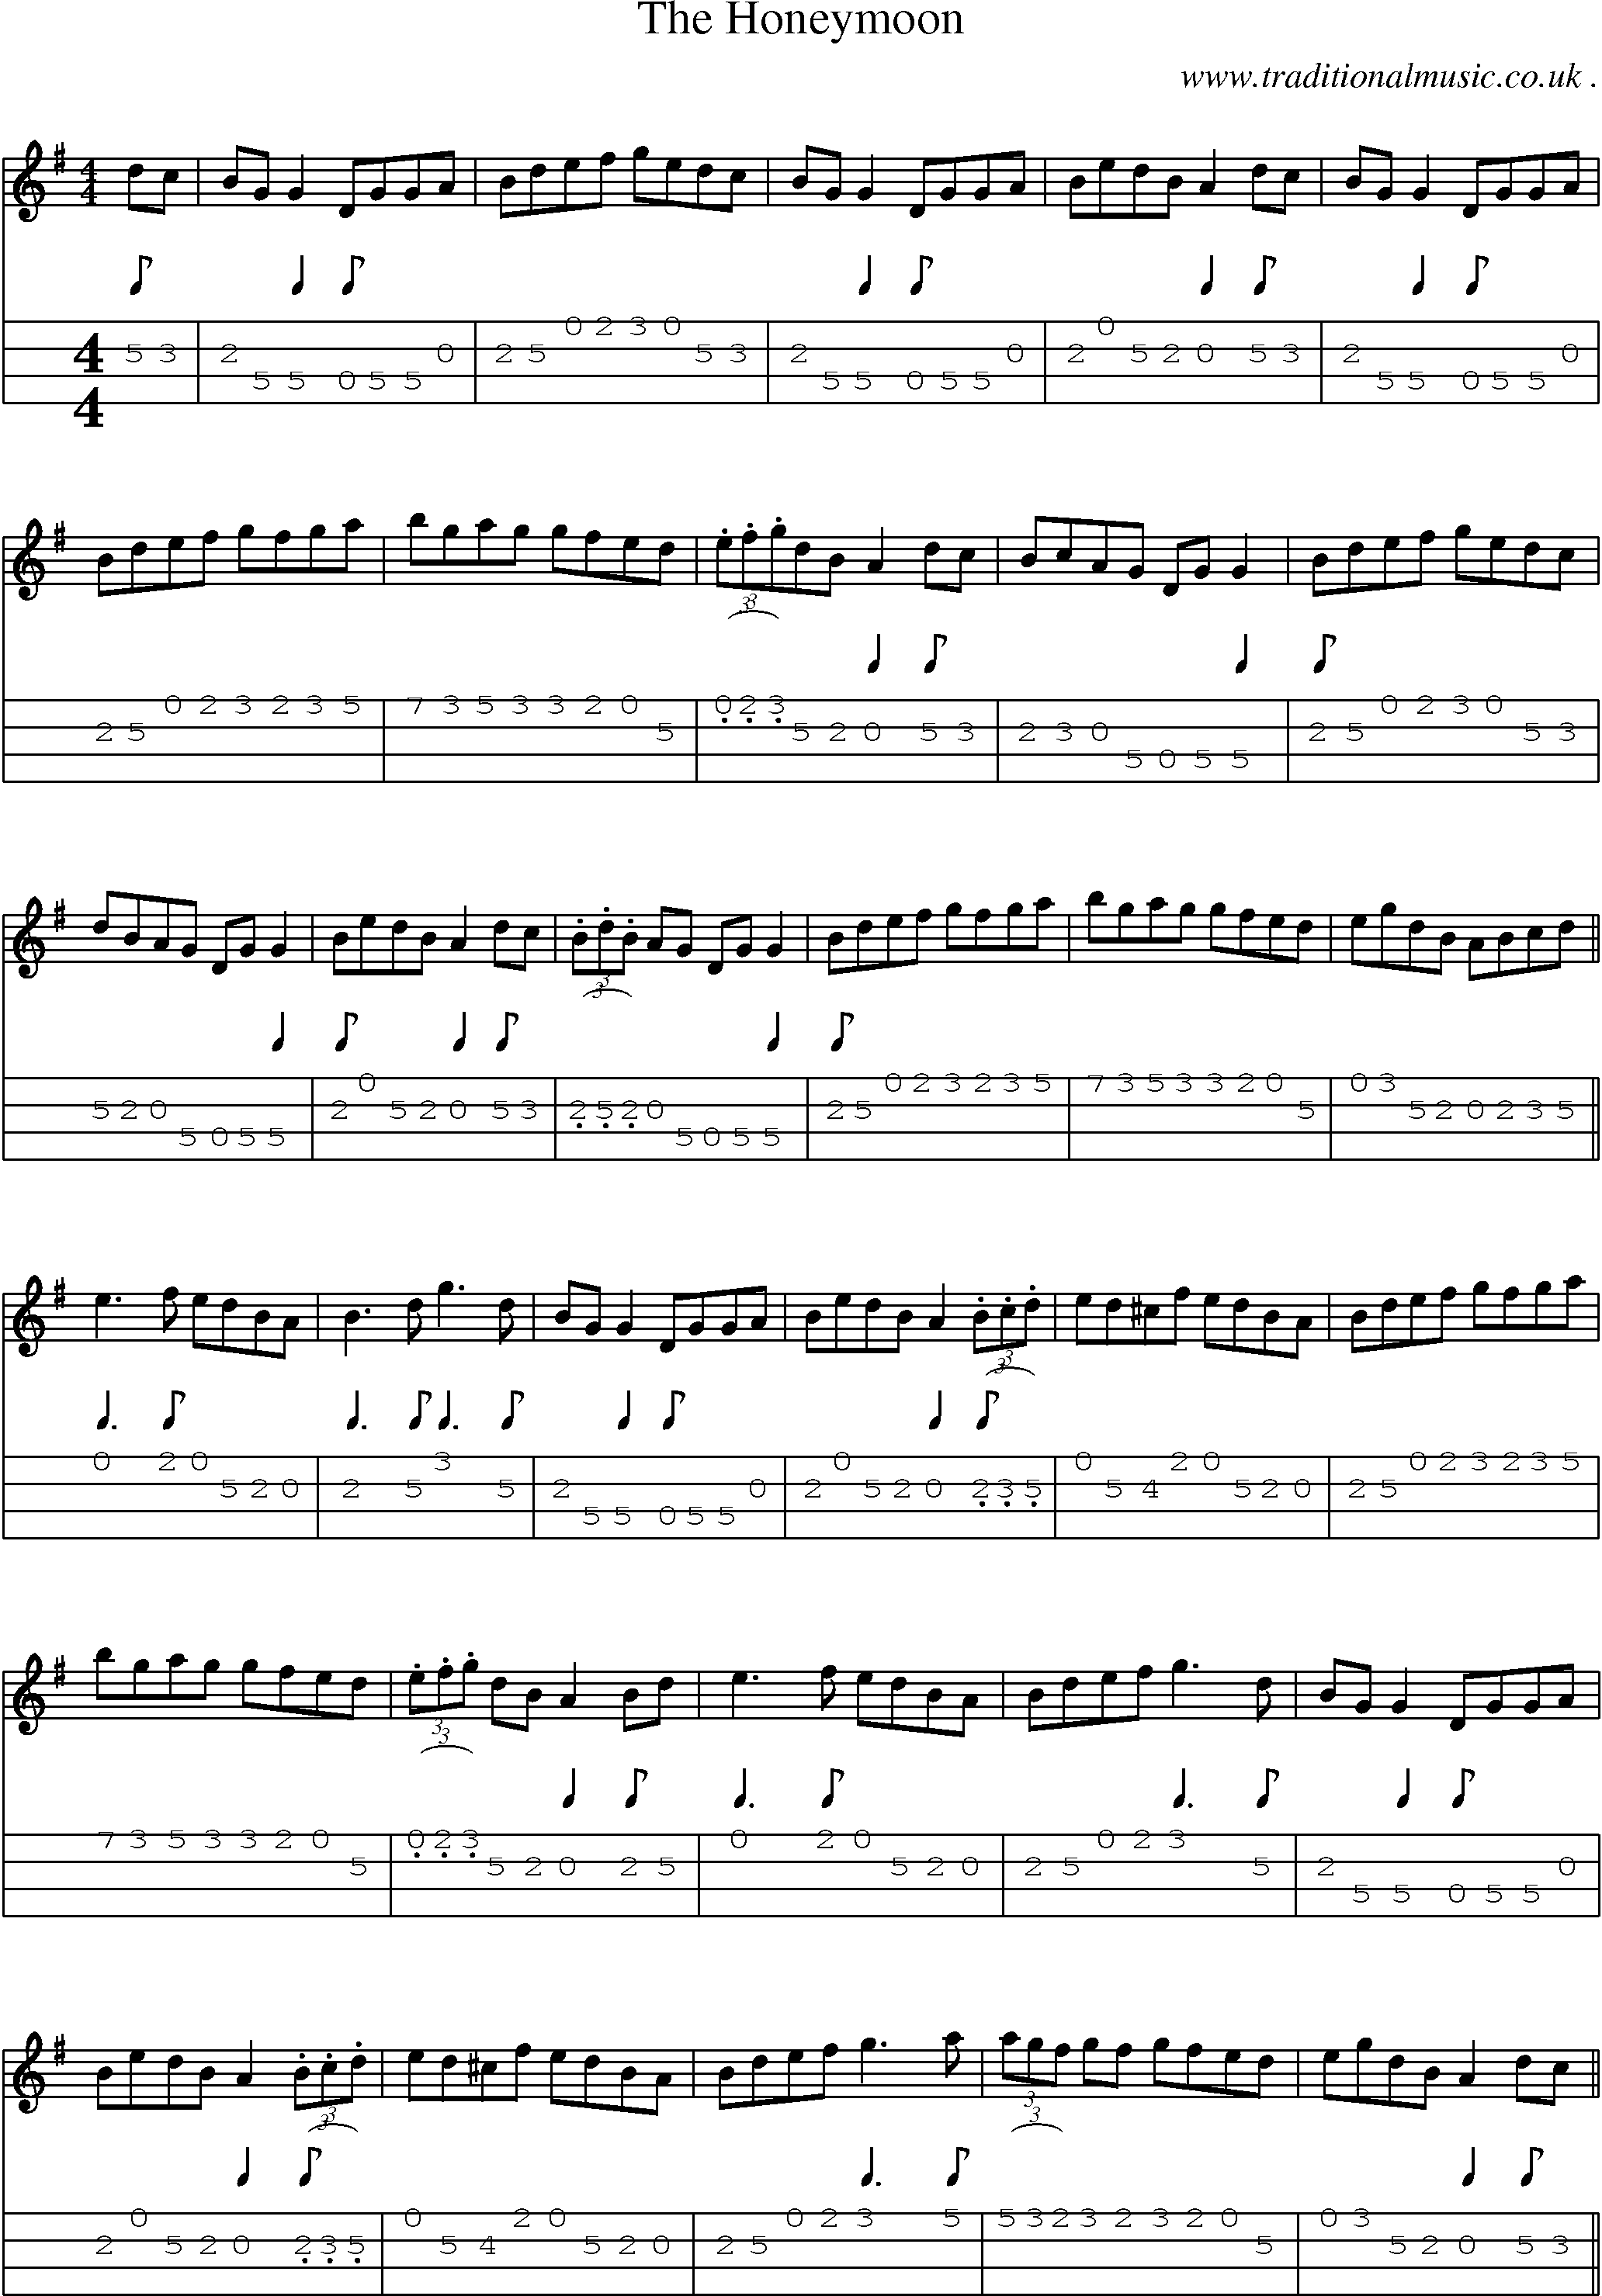 Sheet-Music and Mandolin Tabs for The Honeymoon